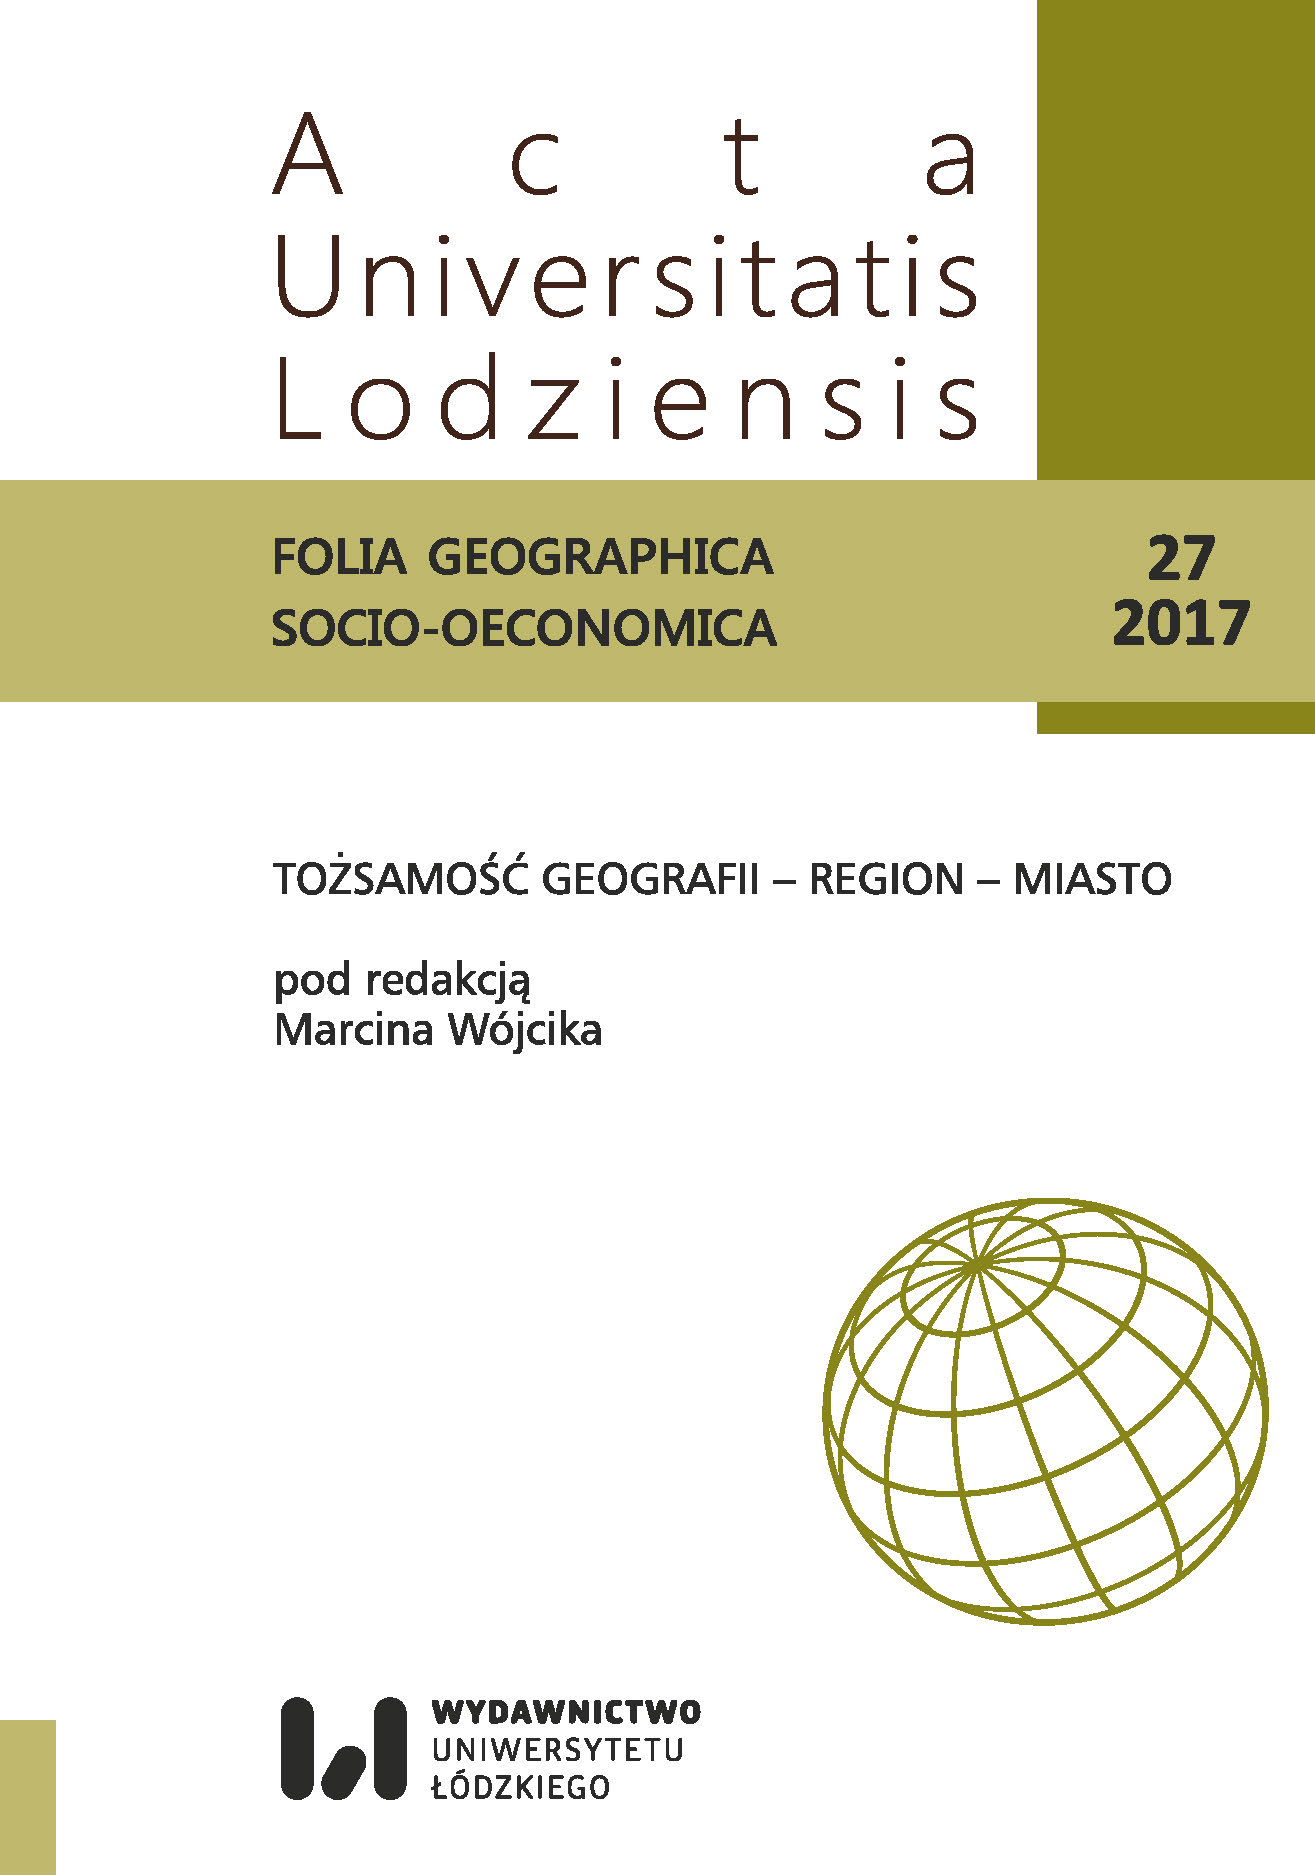 THE LAST BEFORE THE WAR CONVENTION OF POLISH GEOGRAPHERS IN KRAKOW
THE INSTITUTE OF GEOGRAPHY OF THE JAGIELLONIAN UNIVERSITY, 28–29 MAY 1939 Cover Image